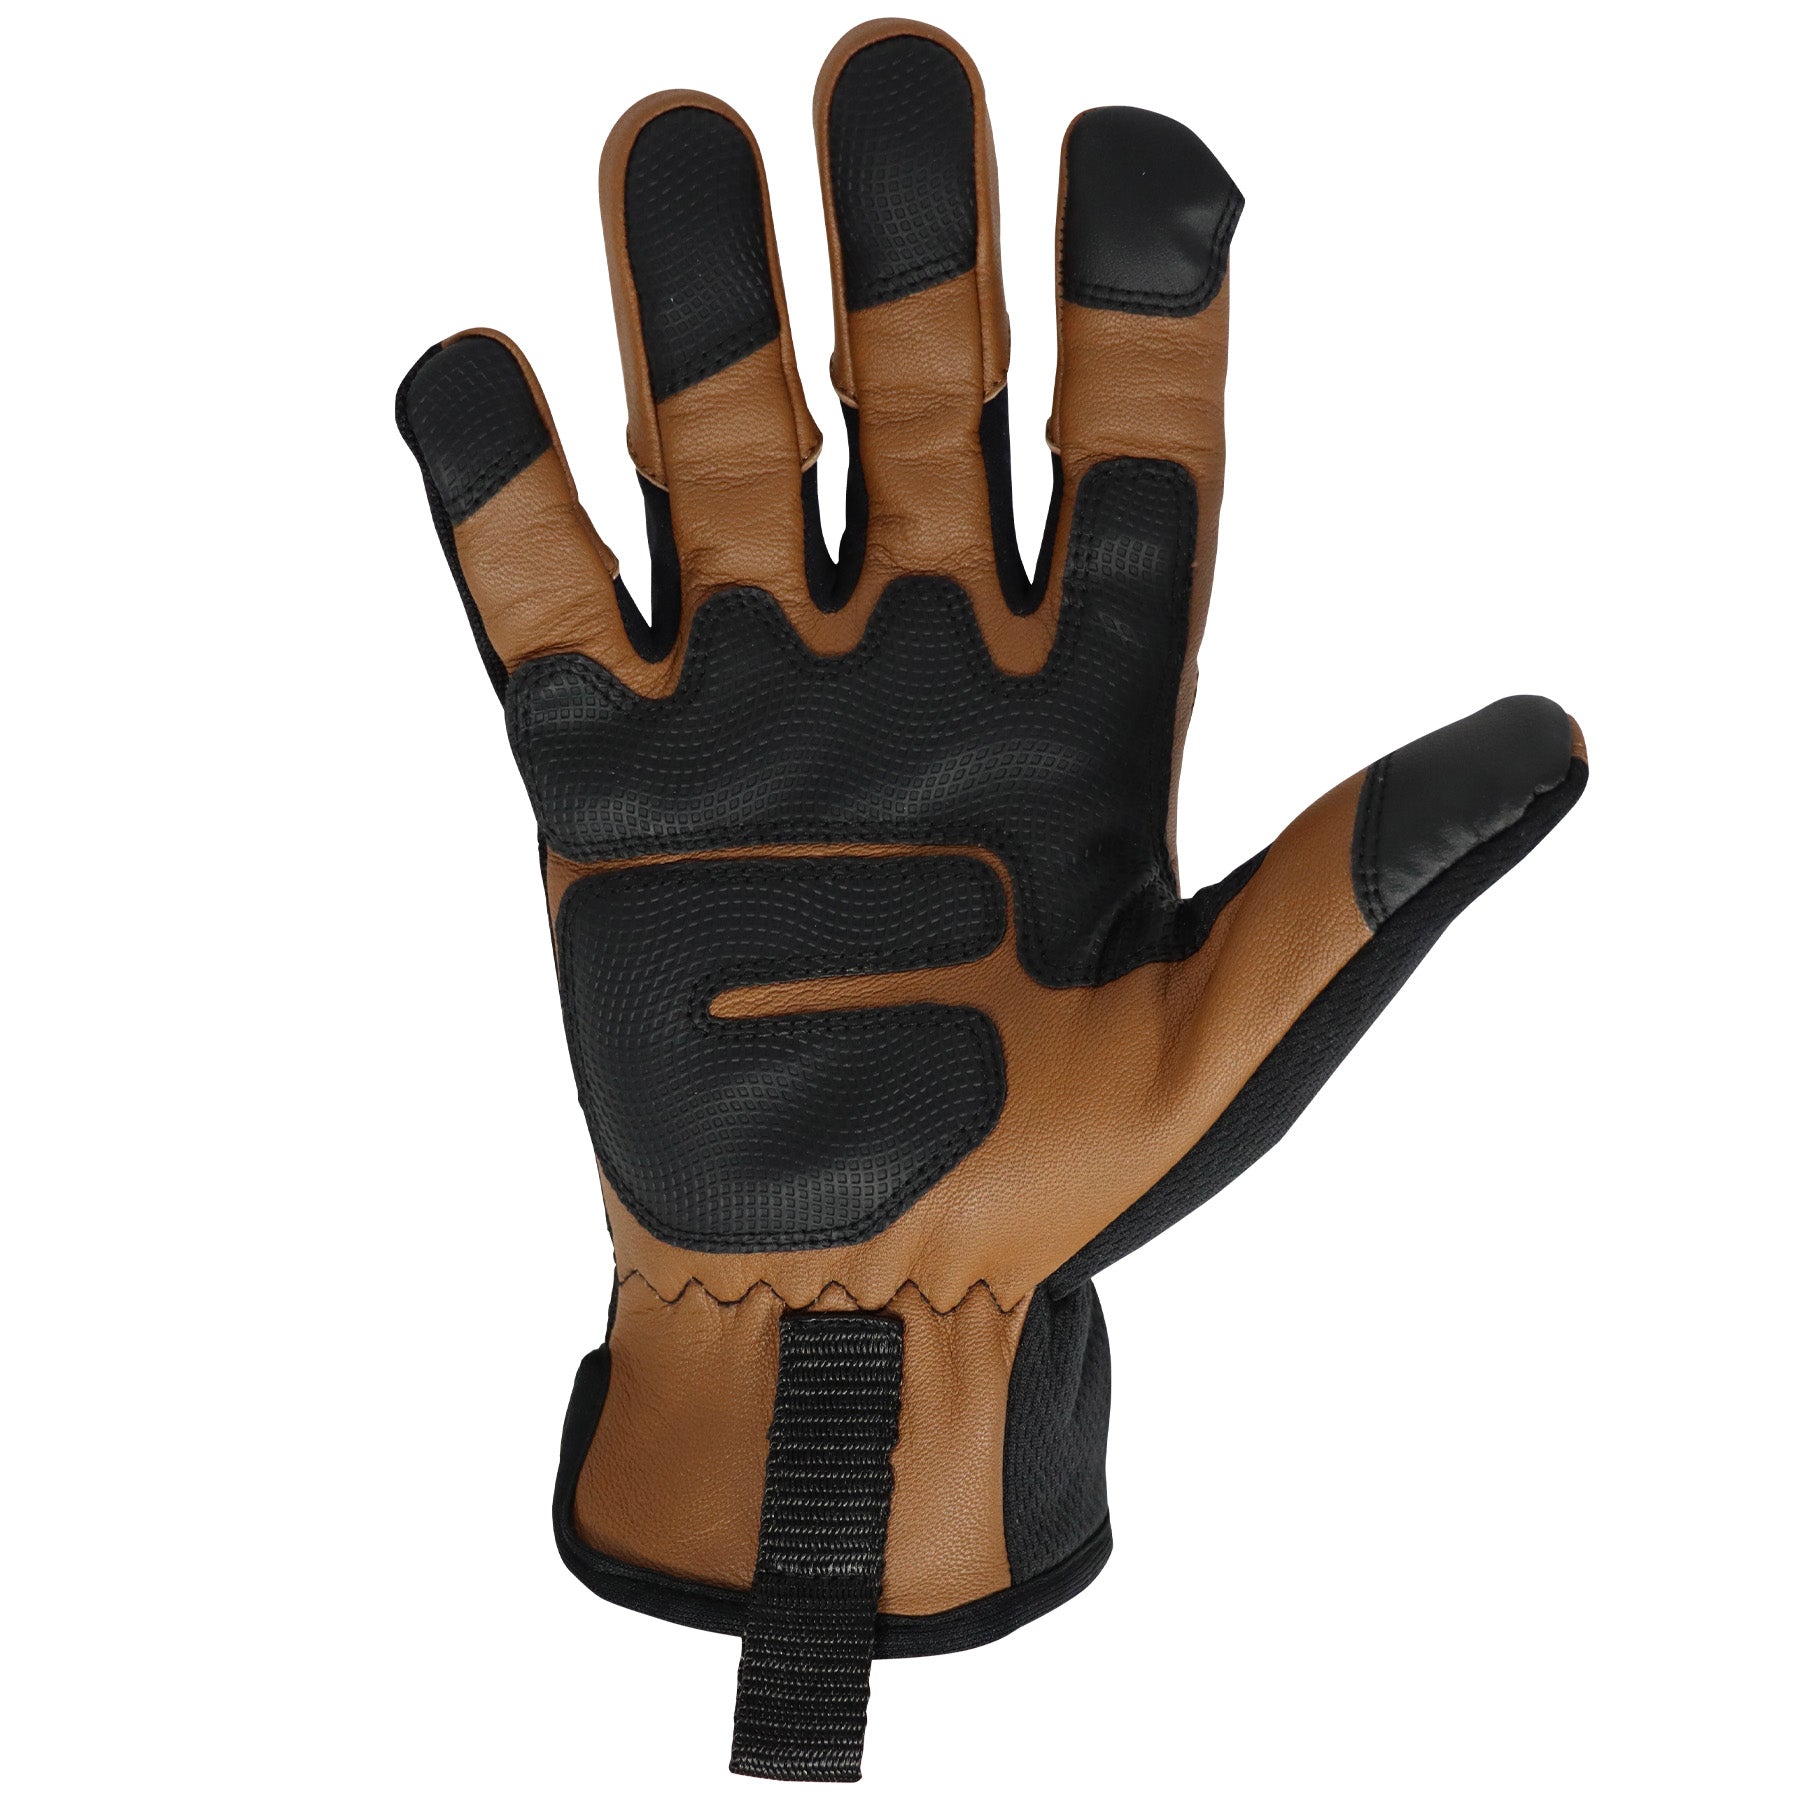 GE PPE  -  #GG419  PRO Mechanics Gloves Hand Protection Genuine Goat Leather- Impact Resistant Gloves